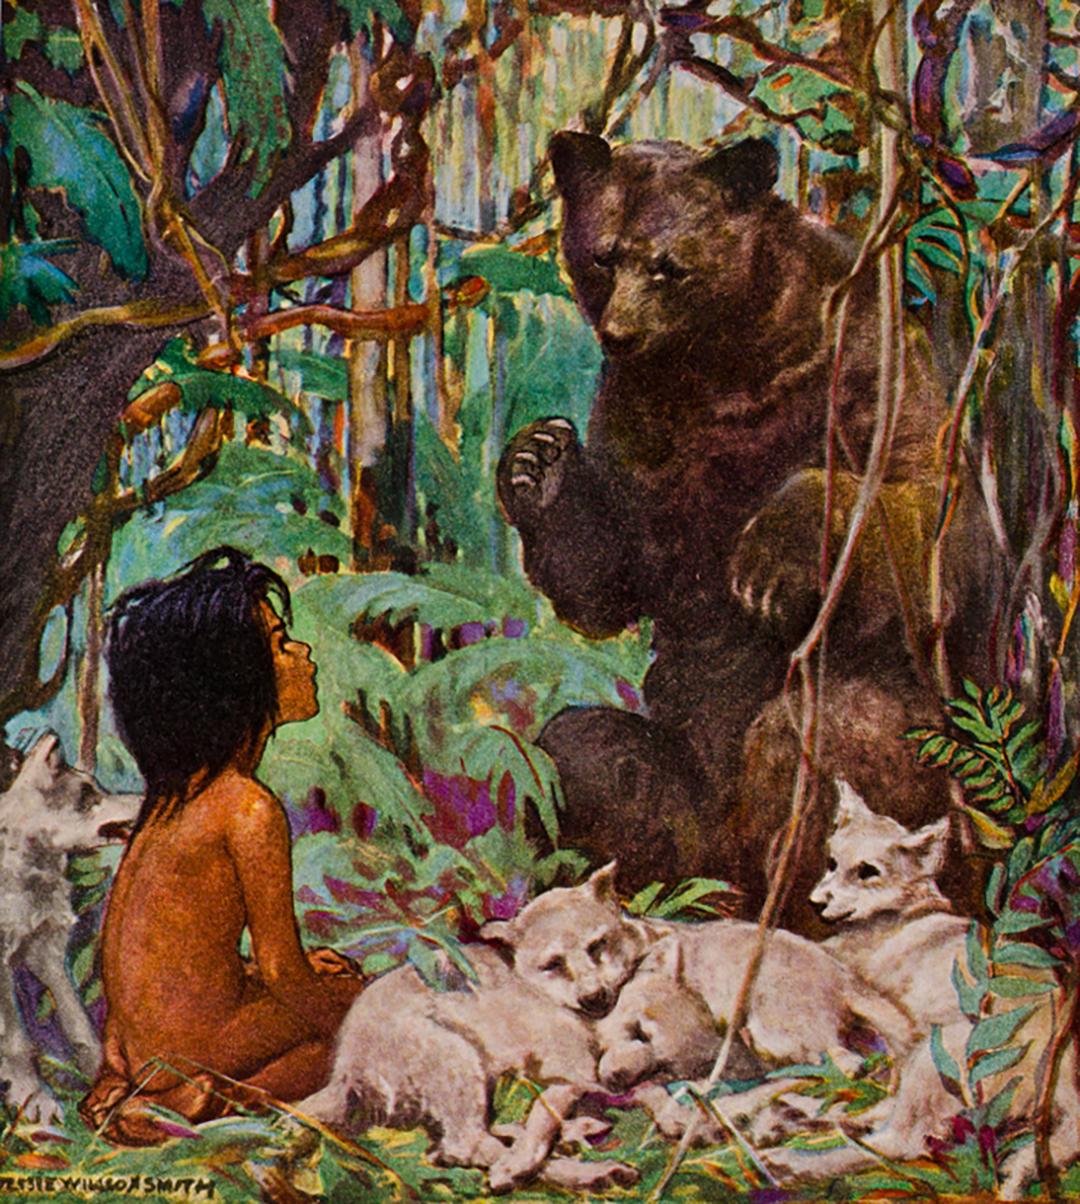 An illustration of Kipling's Mowgli and Baloo, titled "Mowgli," 1923, by Jessie Willcox Smith from "Boys & Girls of Bookland." (Public Domain)